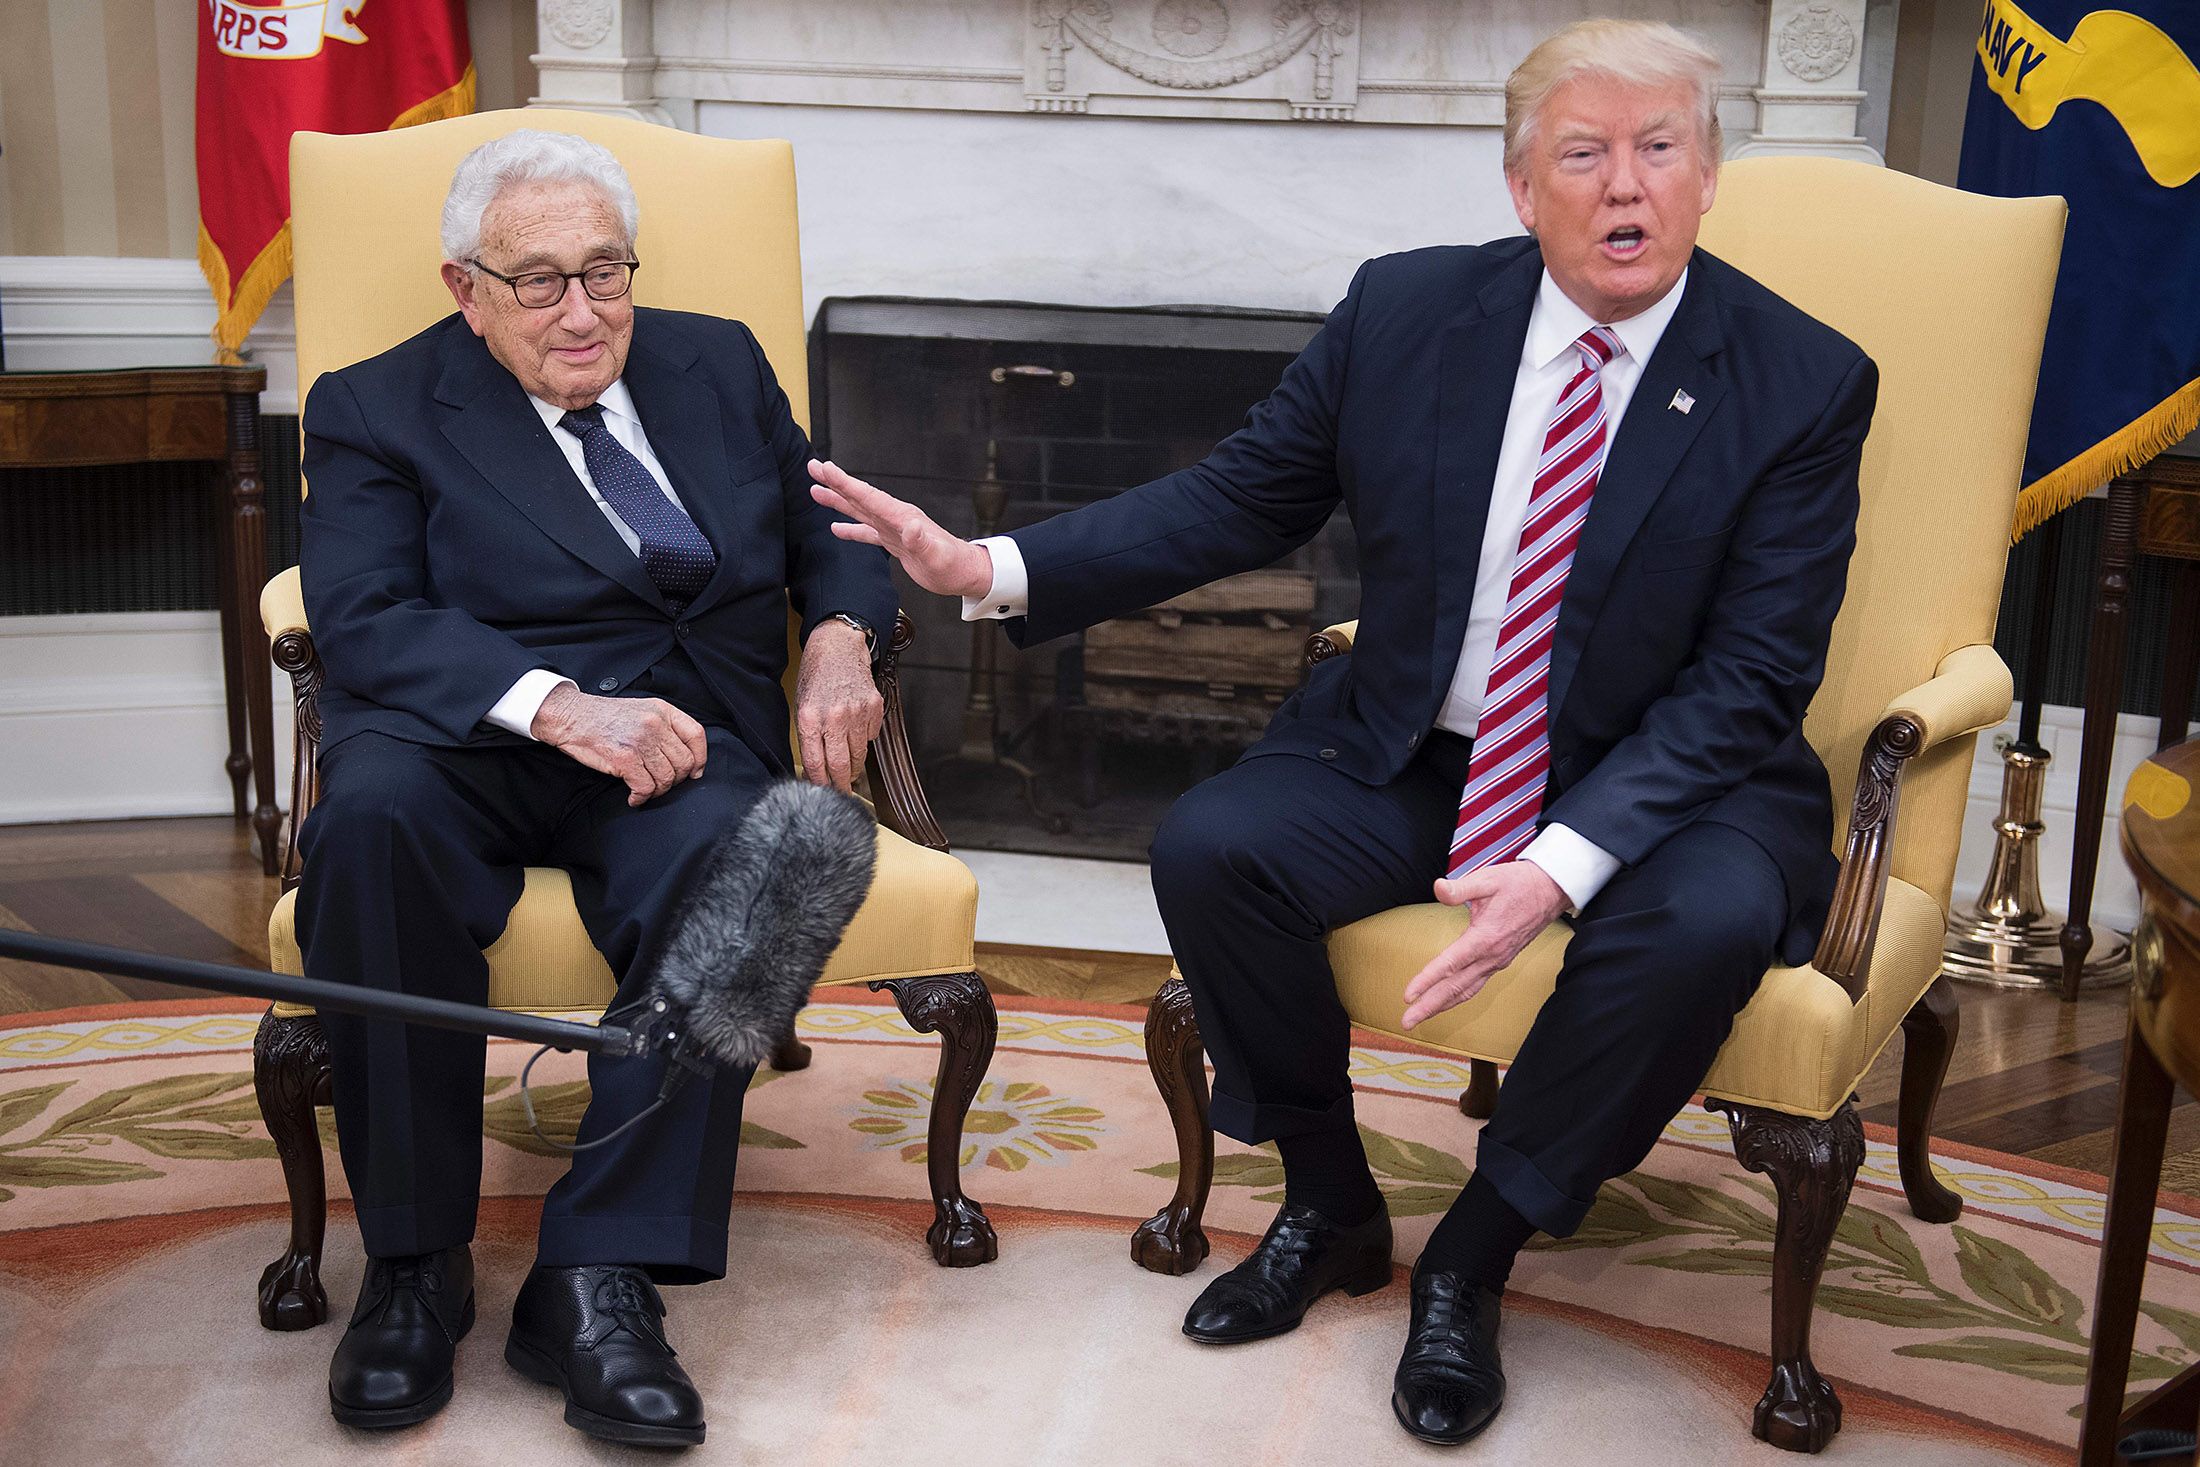 President Donald Trump speaks with Kissinger during a meeting in the White House Oval Office in 2017.